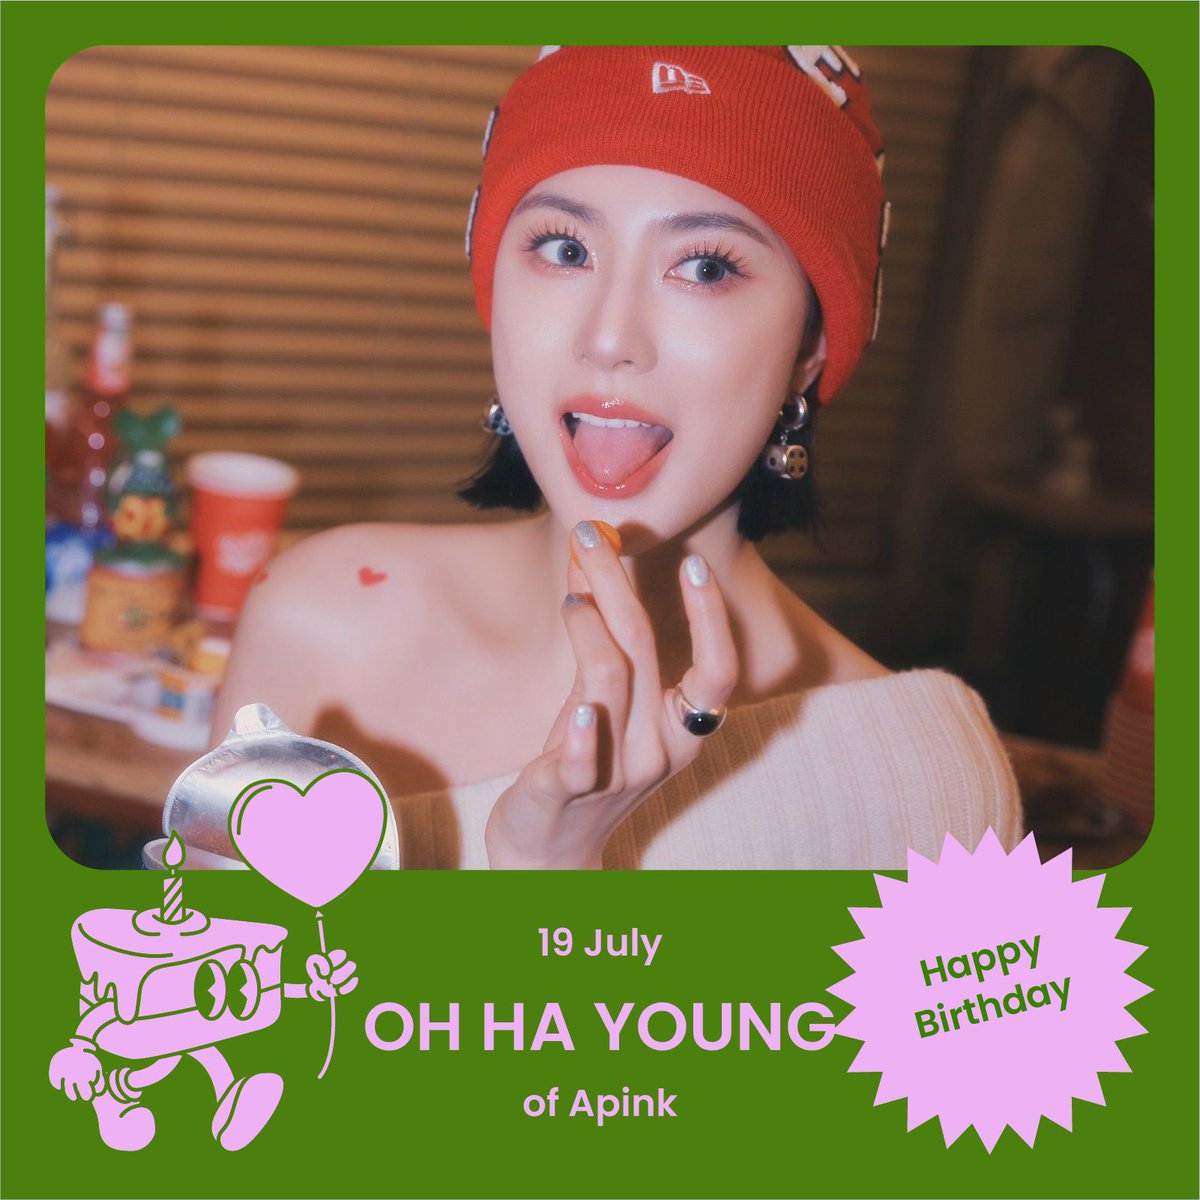 💖 Happy #OhHaYoung Day 💖
Today is #Apink #OhHaYoung ’s birthday-! 🎉
Hey #PANDA ! Have a lovely pink day~! ✨

✨ #에이핑크 의 오프로디테 막내 오하빵 🥐
#오하영 의 생일을 축하합니다~! 🎂

#오하영트친님_생일_이랍니다 #Happy_Hayoung_Day
#USCAKE #어스케이크